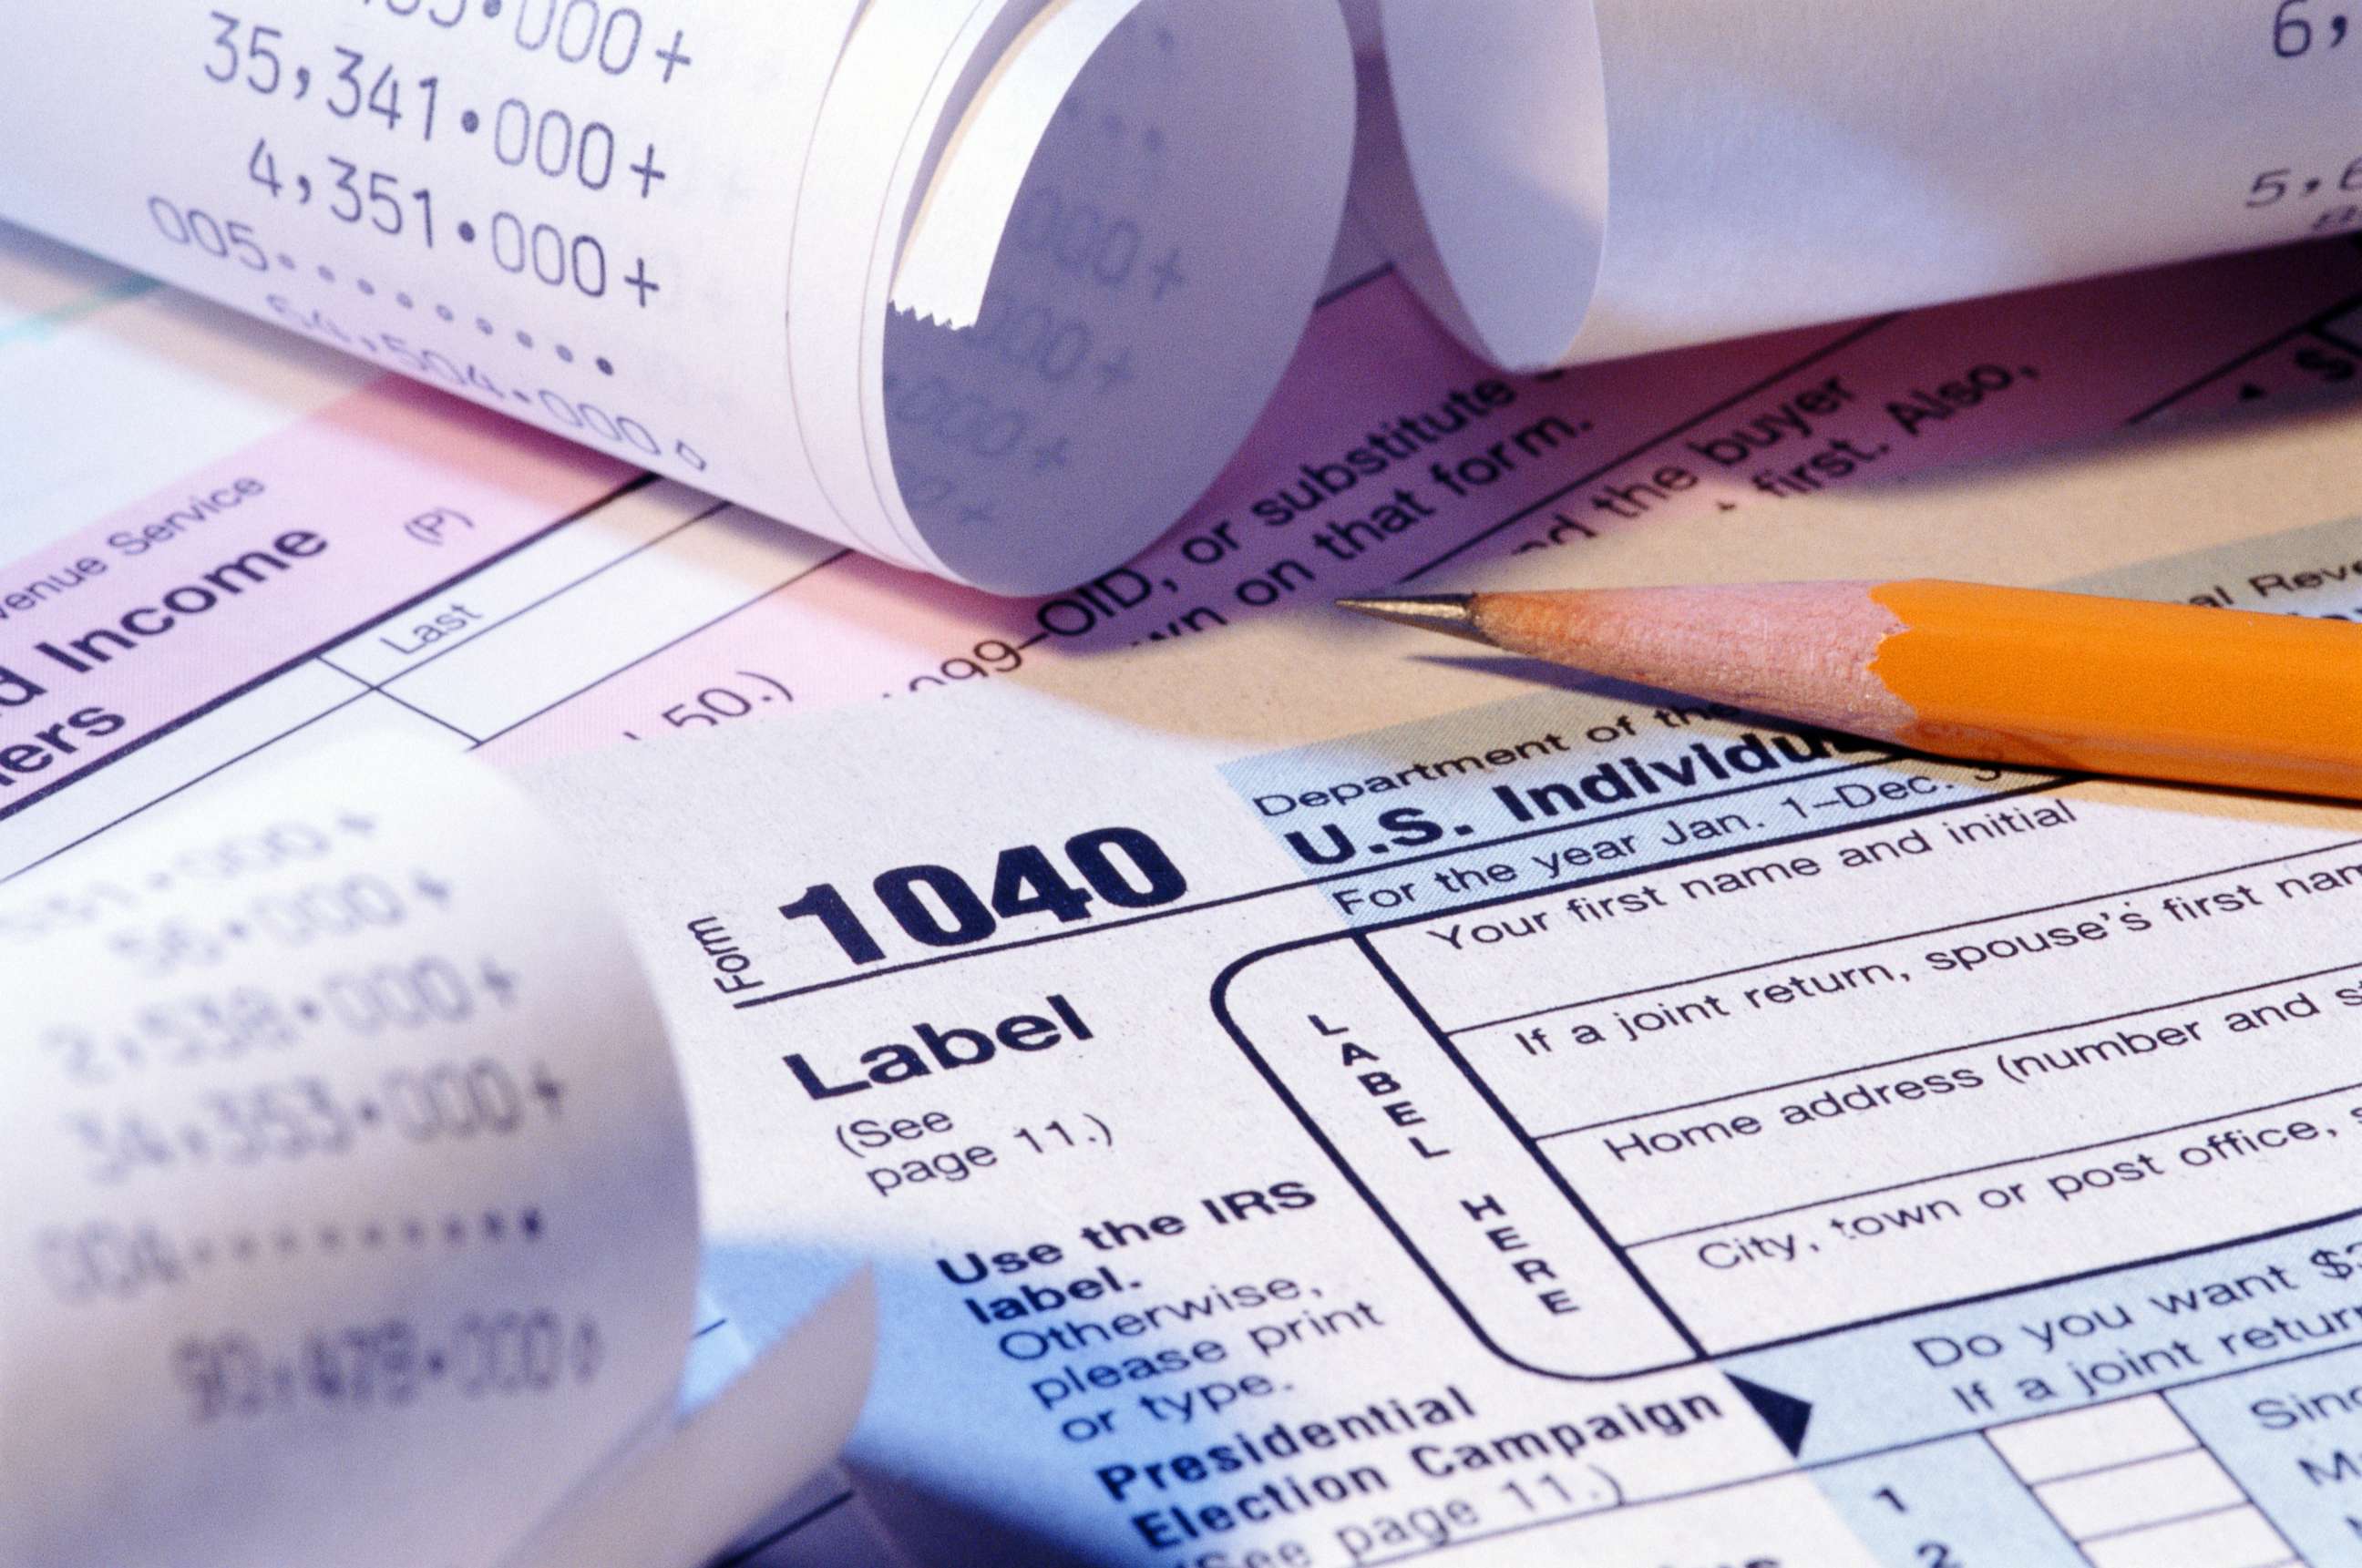 PHOTO: A tax form, receipts and pencil are pictured in this undated stock photo.